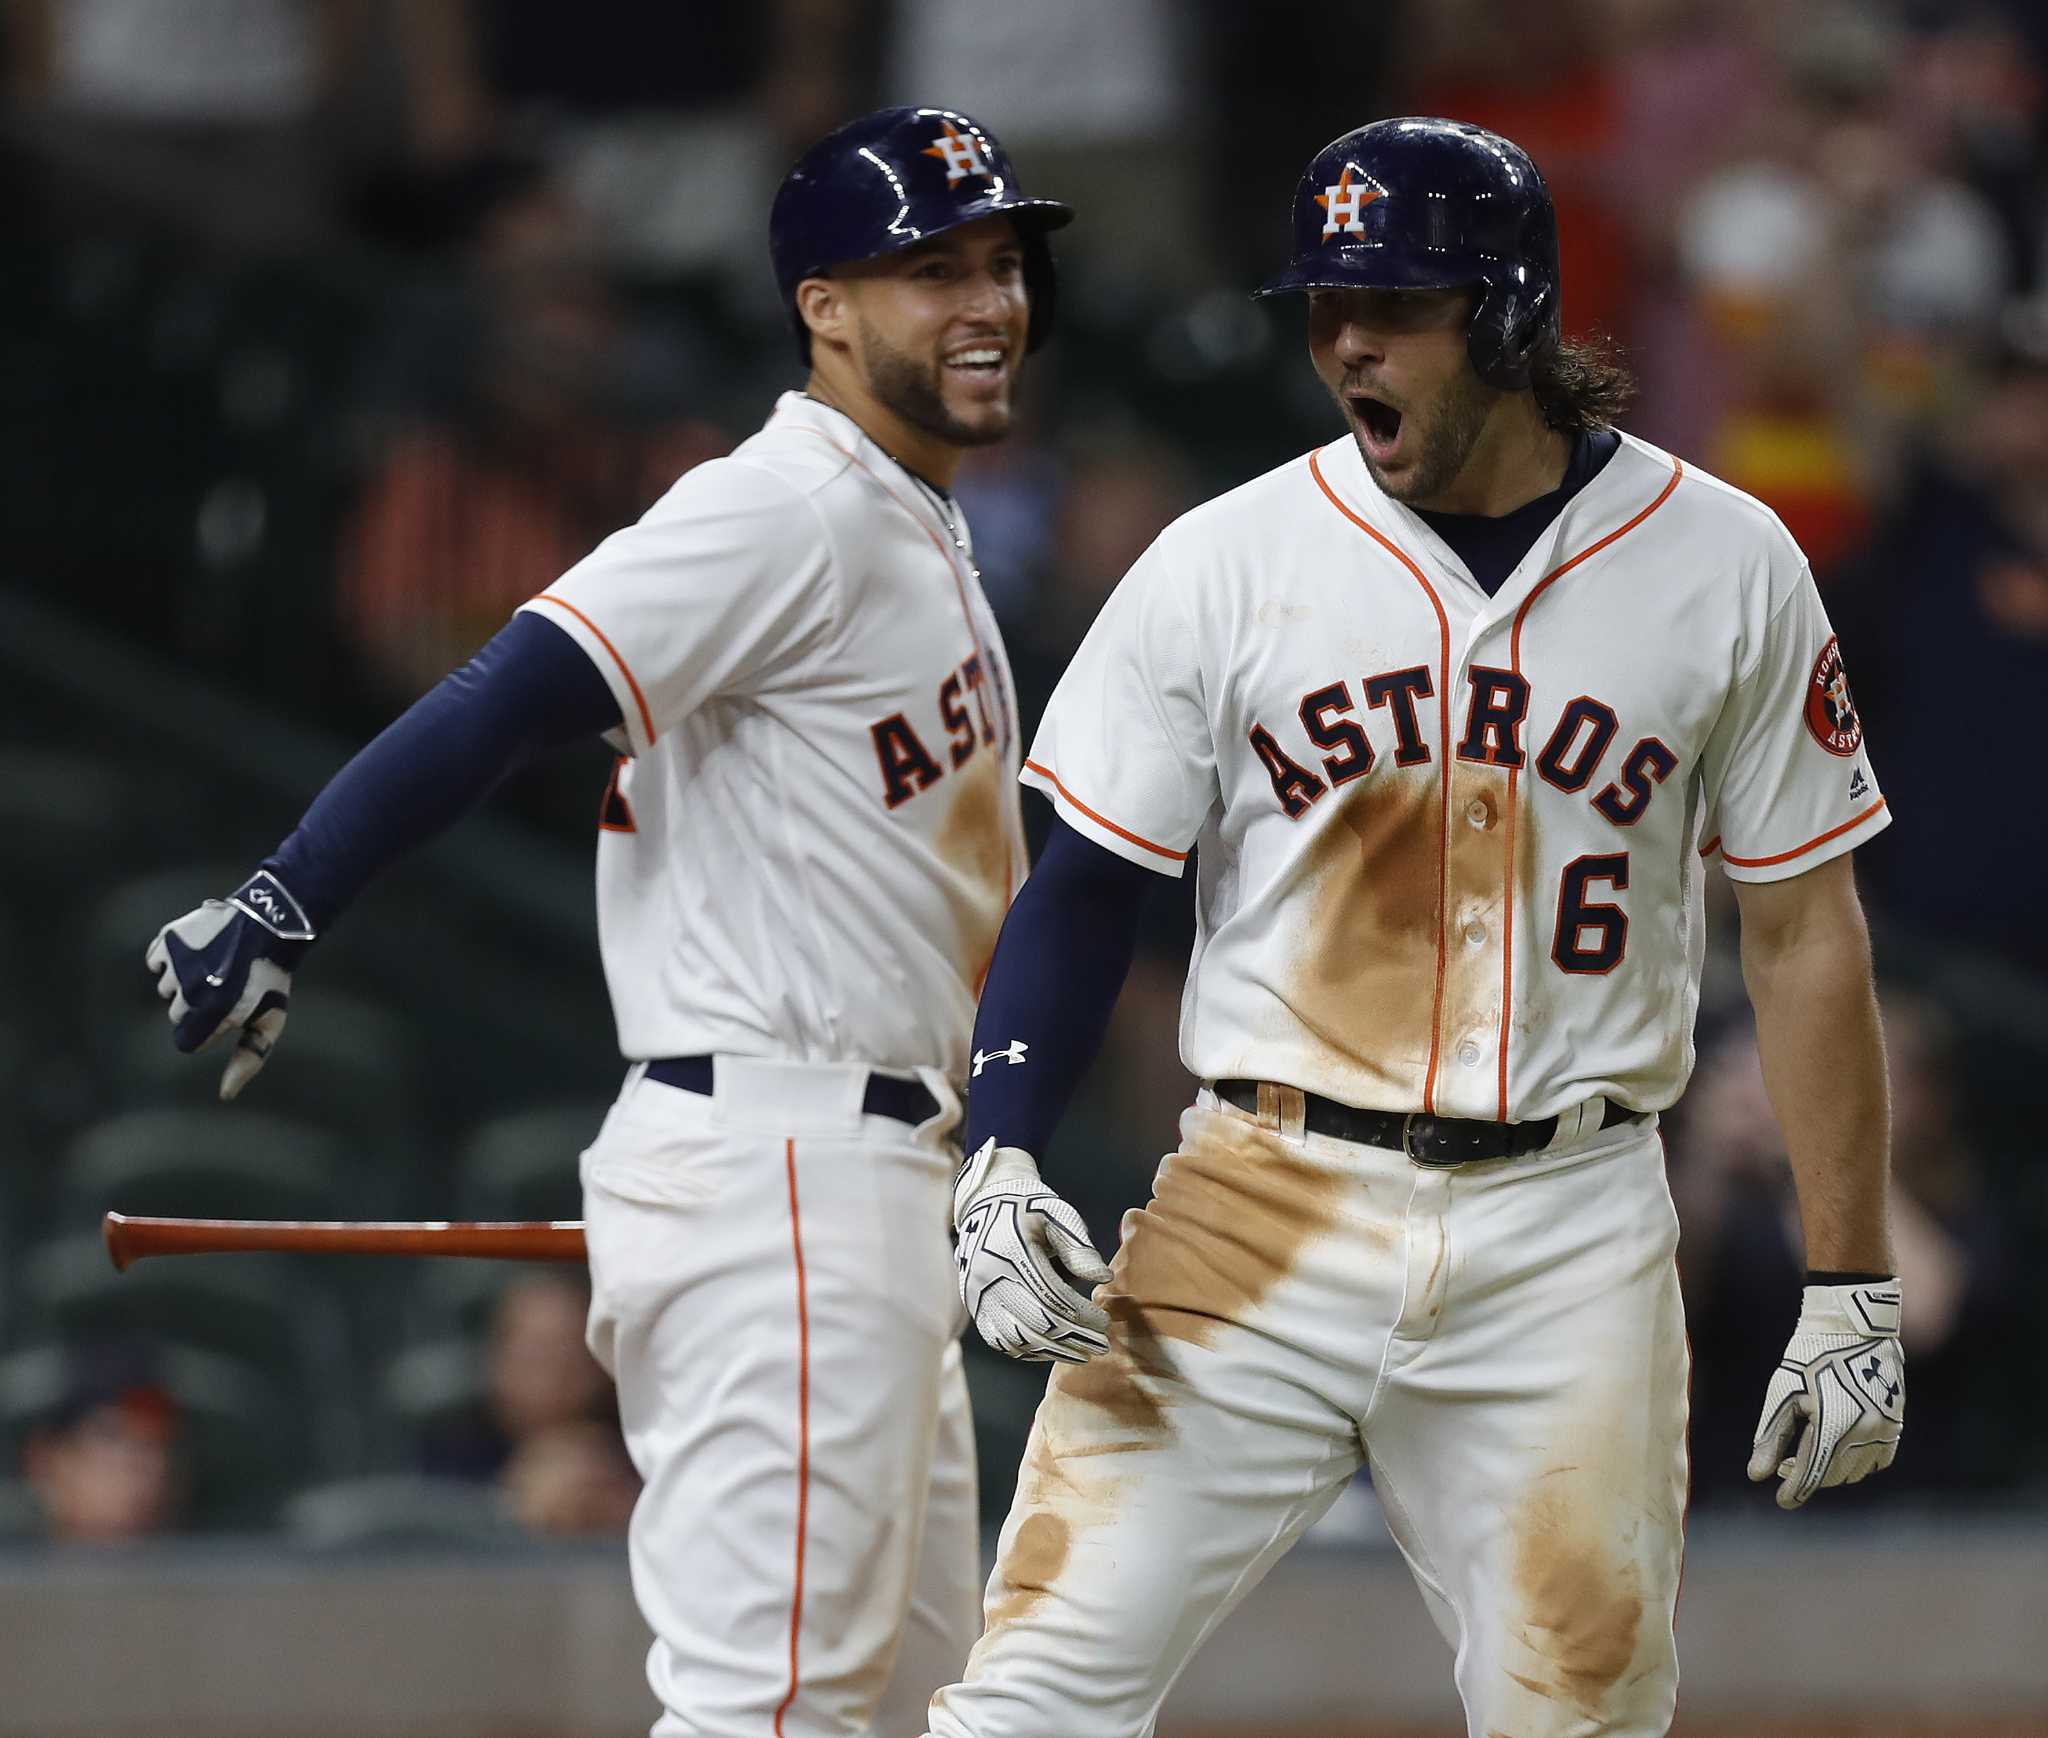 Jake Marisnick: 5 facts about the Houston Astros outfielder